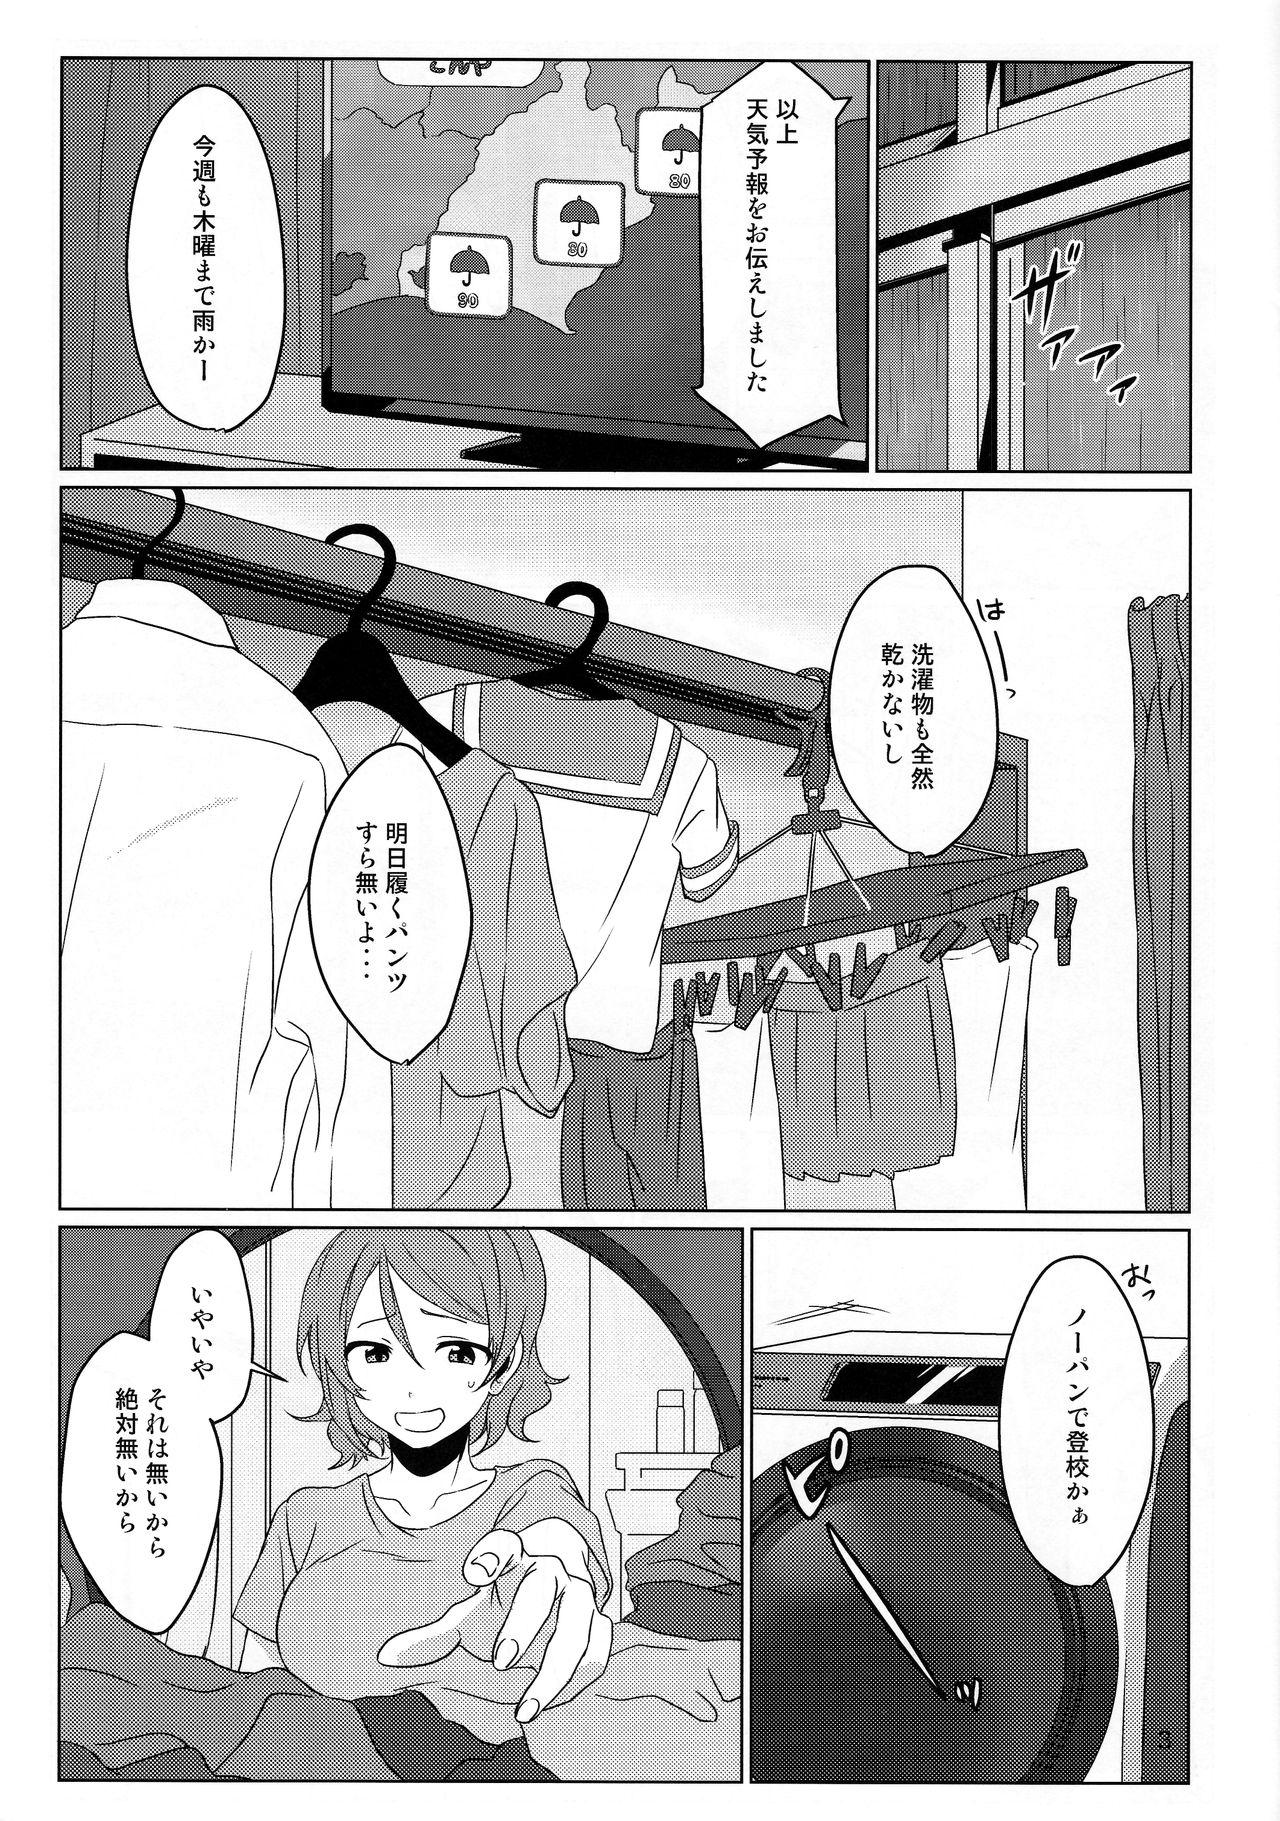 Large Coin laundry - Love live sunshine All - Page 2